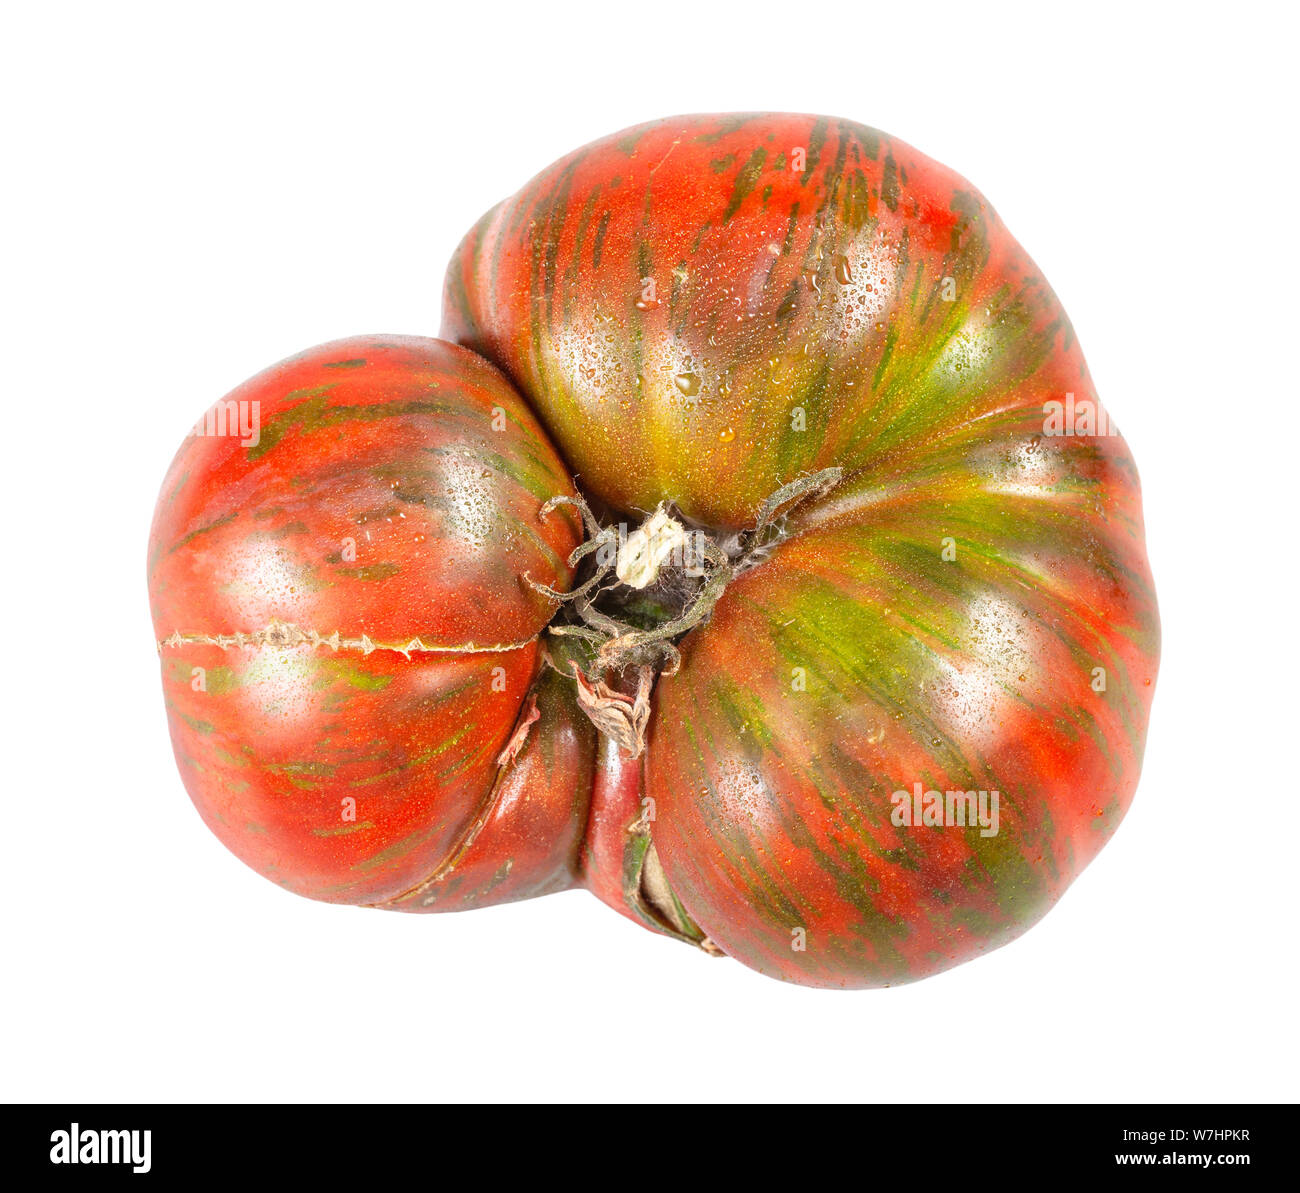 fresh large tomato with green veins isolated on white background Stock Photo